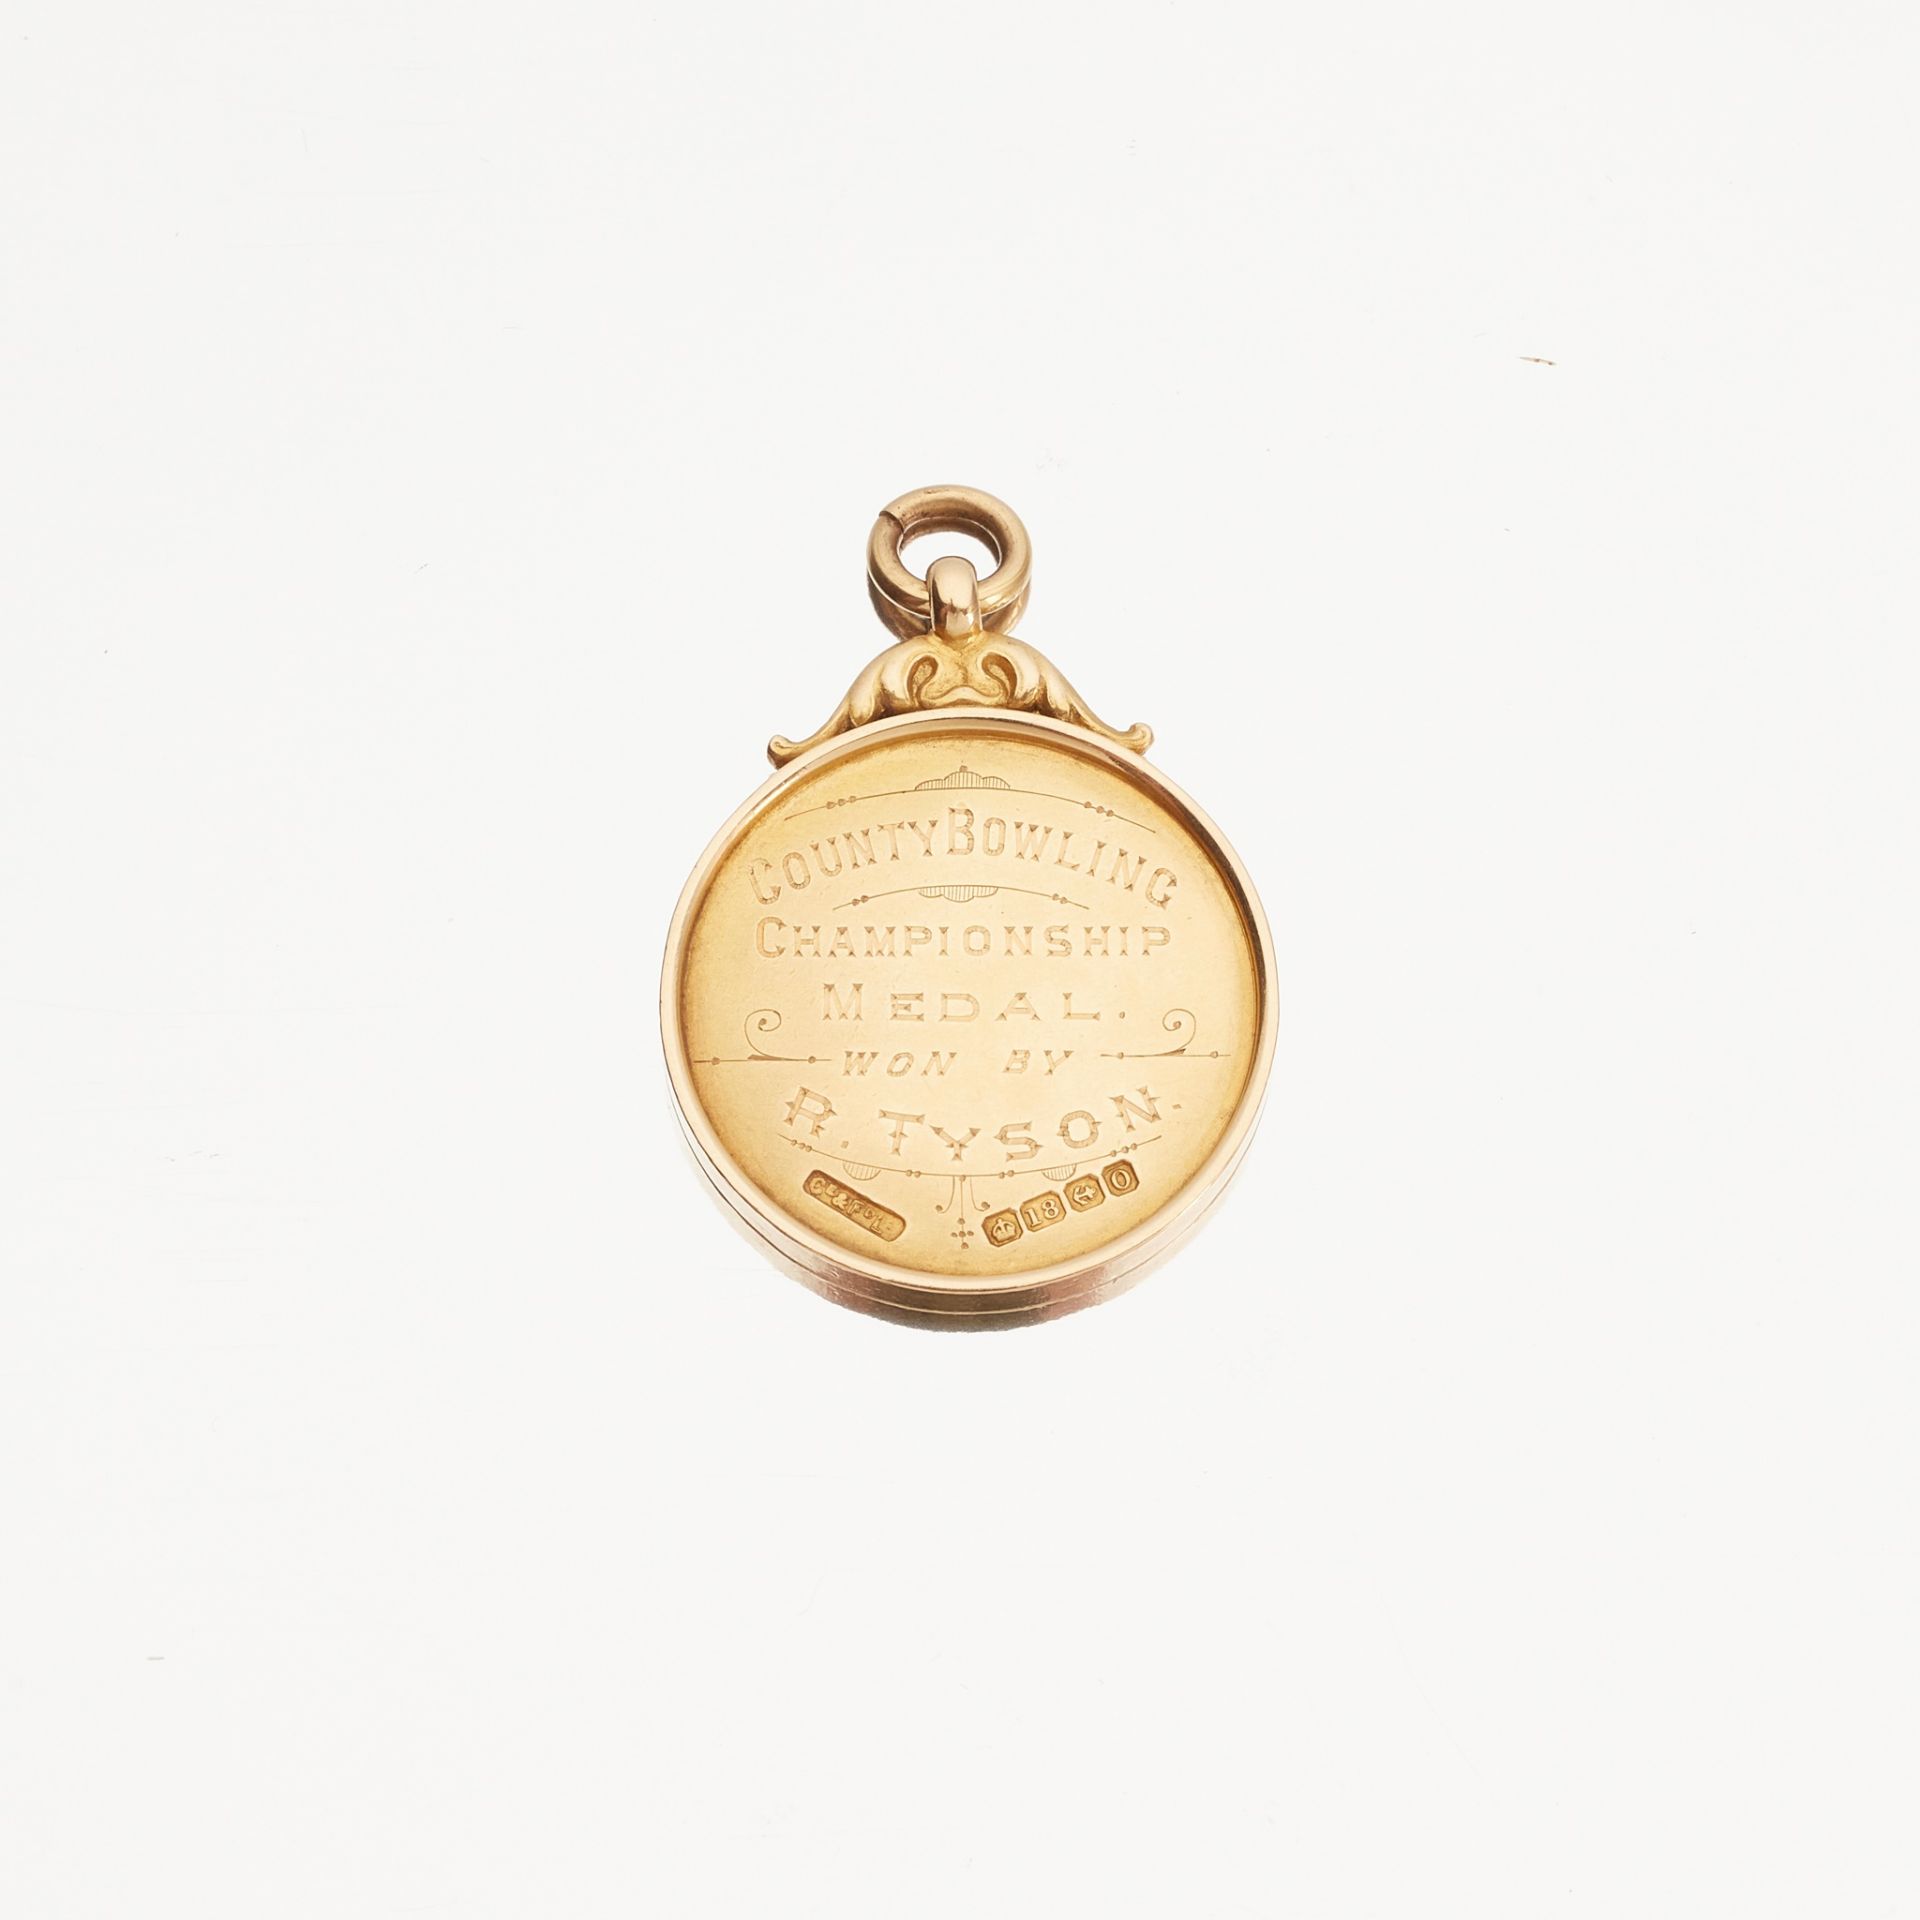 An 18ct gold Bowling Medal - Image 2 of 2